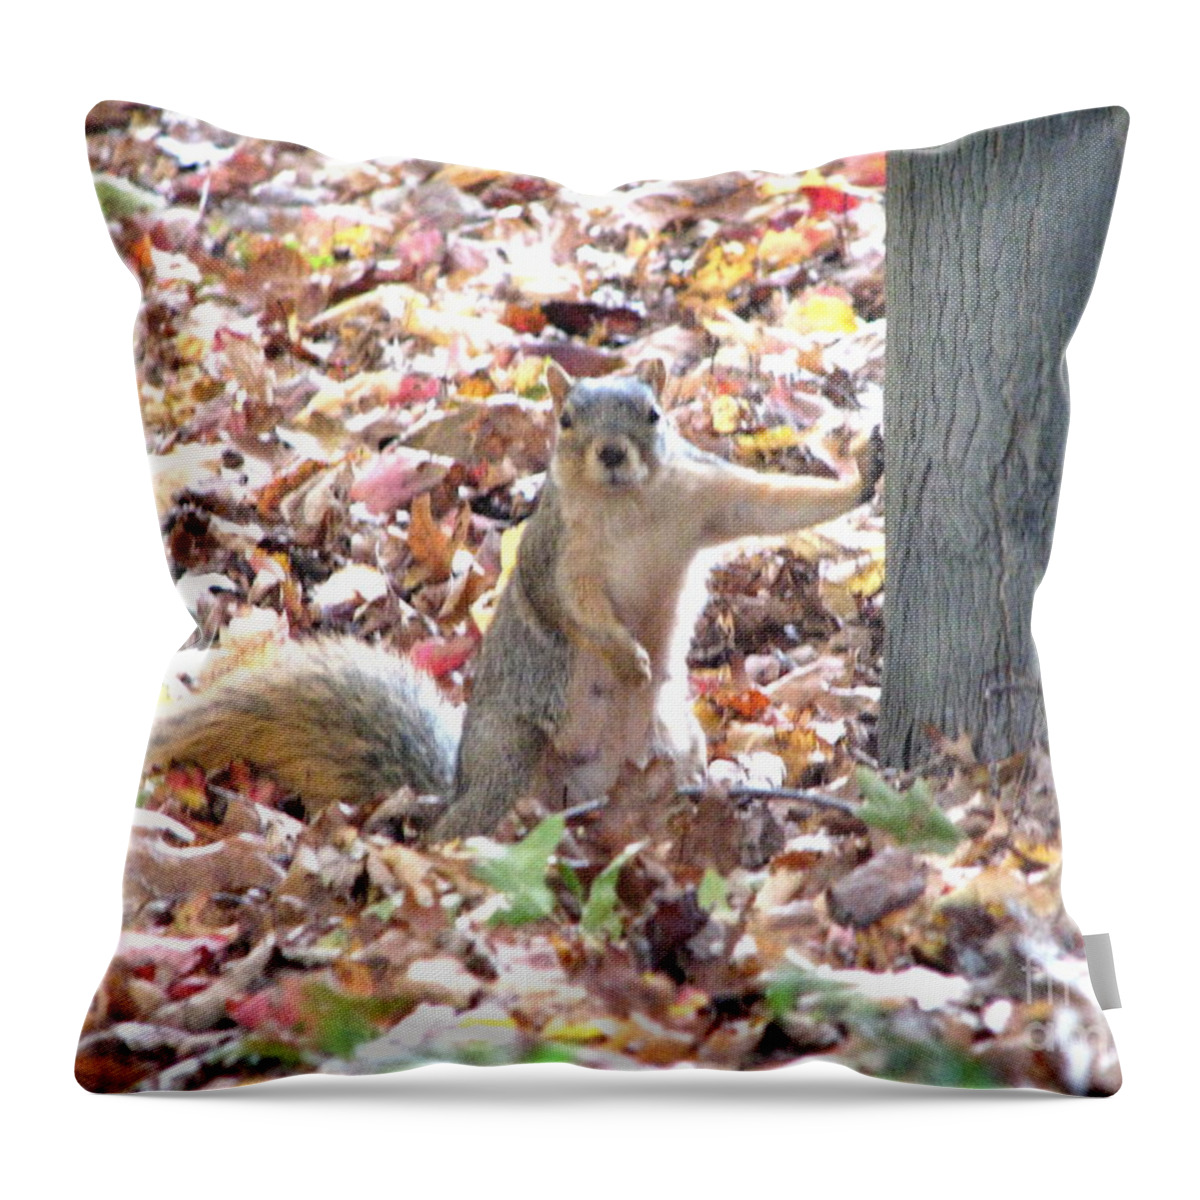 Squirrel Throw Pillow featuring the photograph Are you looking at me ? by Michael Krek